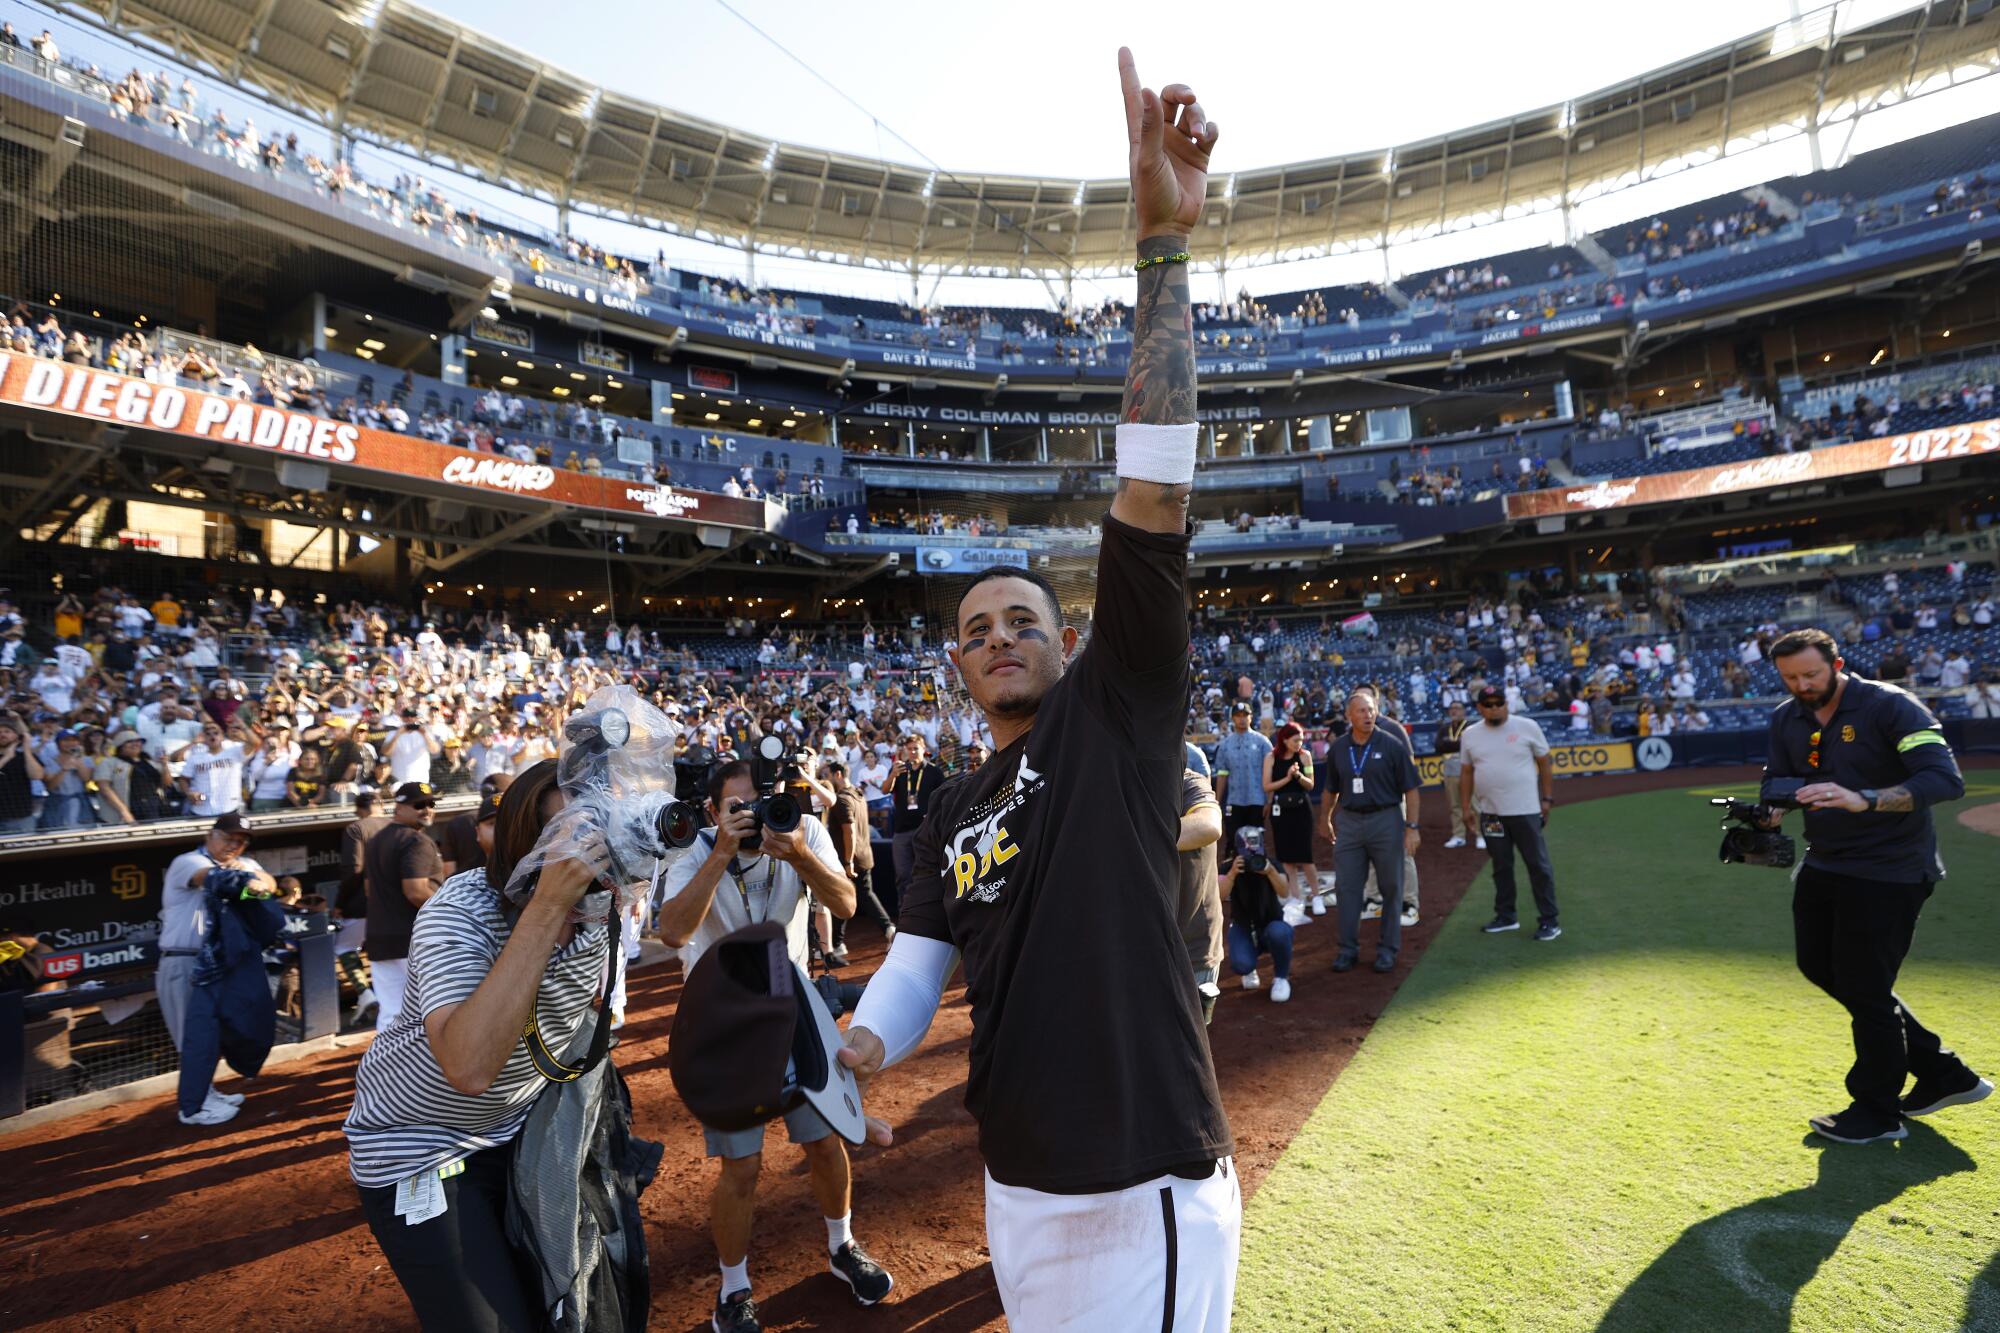 Padres celebrate reaching playoffs for seventh time in franchise